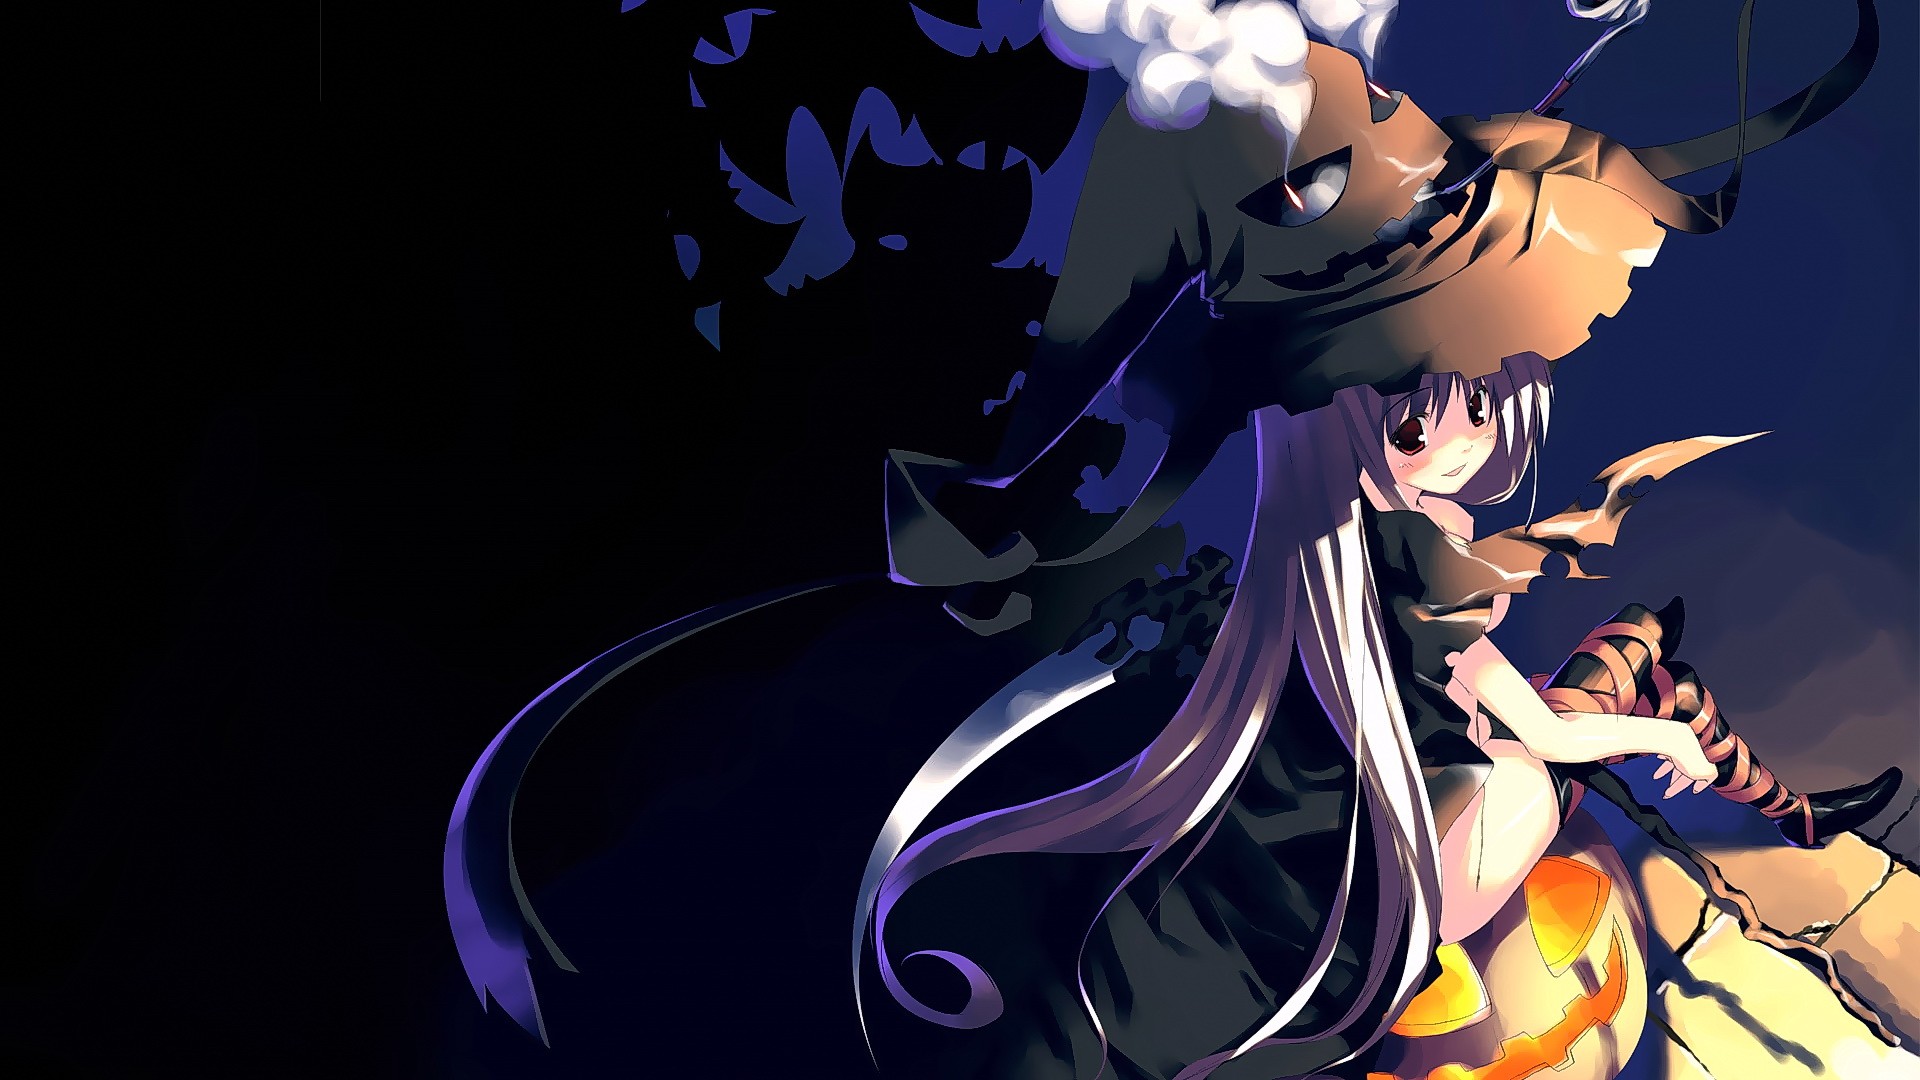 Anime 1920x1080 anime anime girls long hair hat sitting looking at viewer pumpkin witch hat women with hats fantasy art fantasy girl purple hair